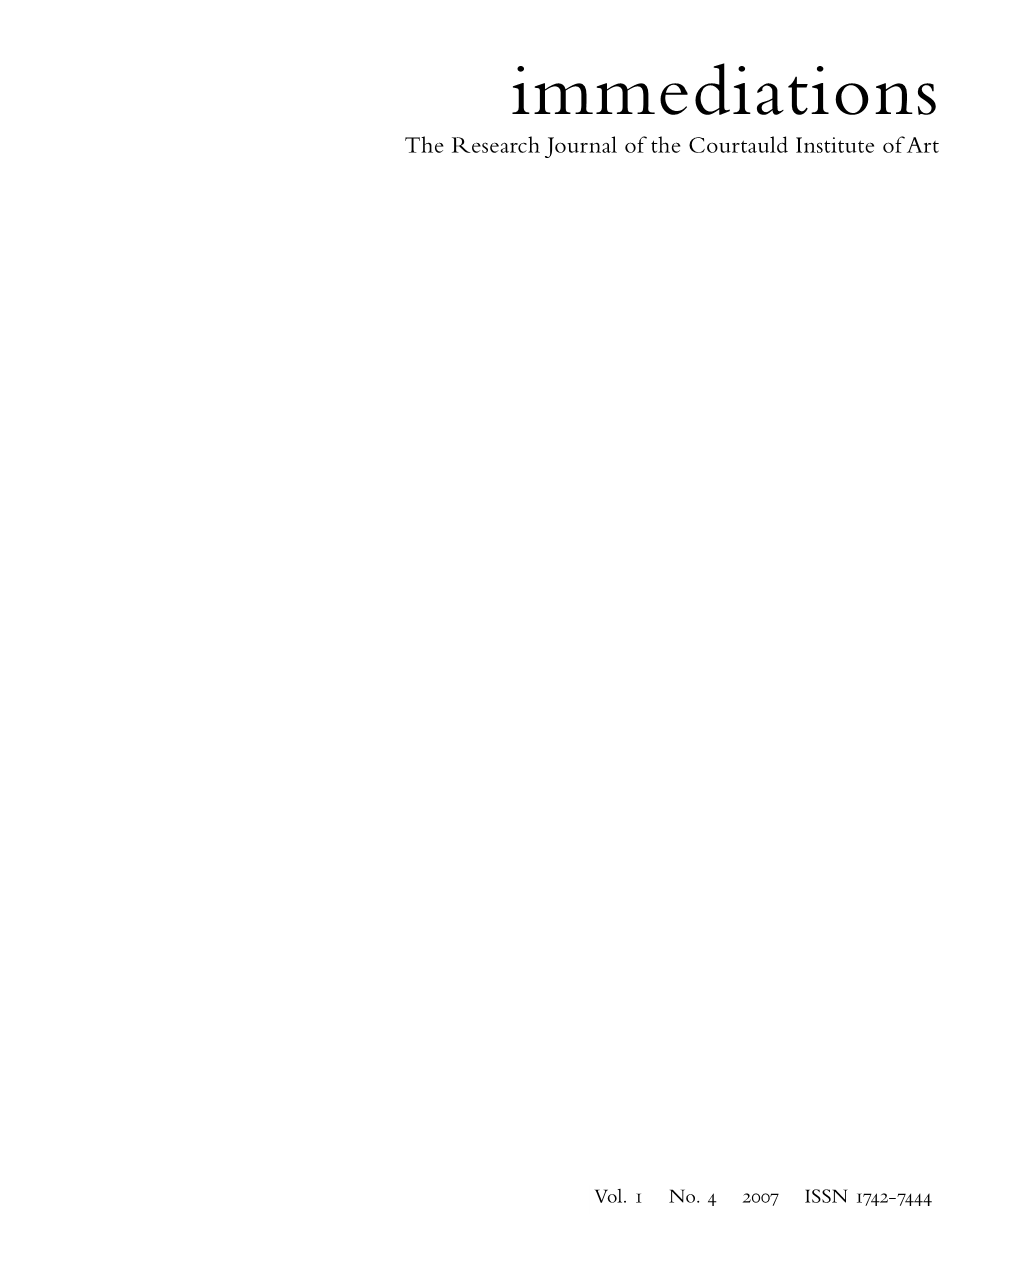 Immediations the Research Journal of the Courtauld Institute of Art